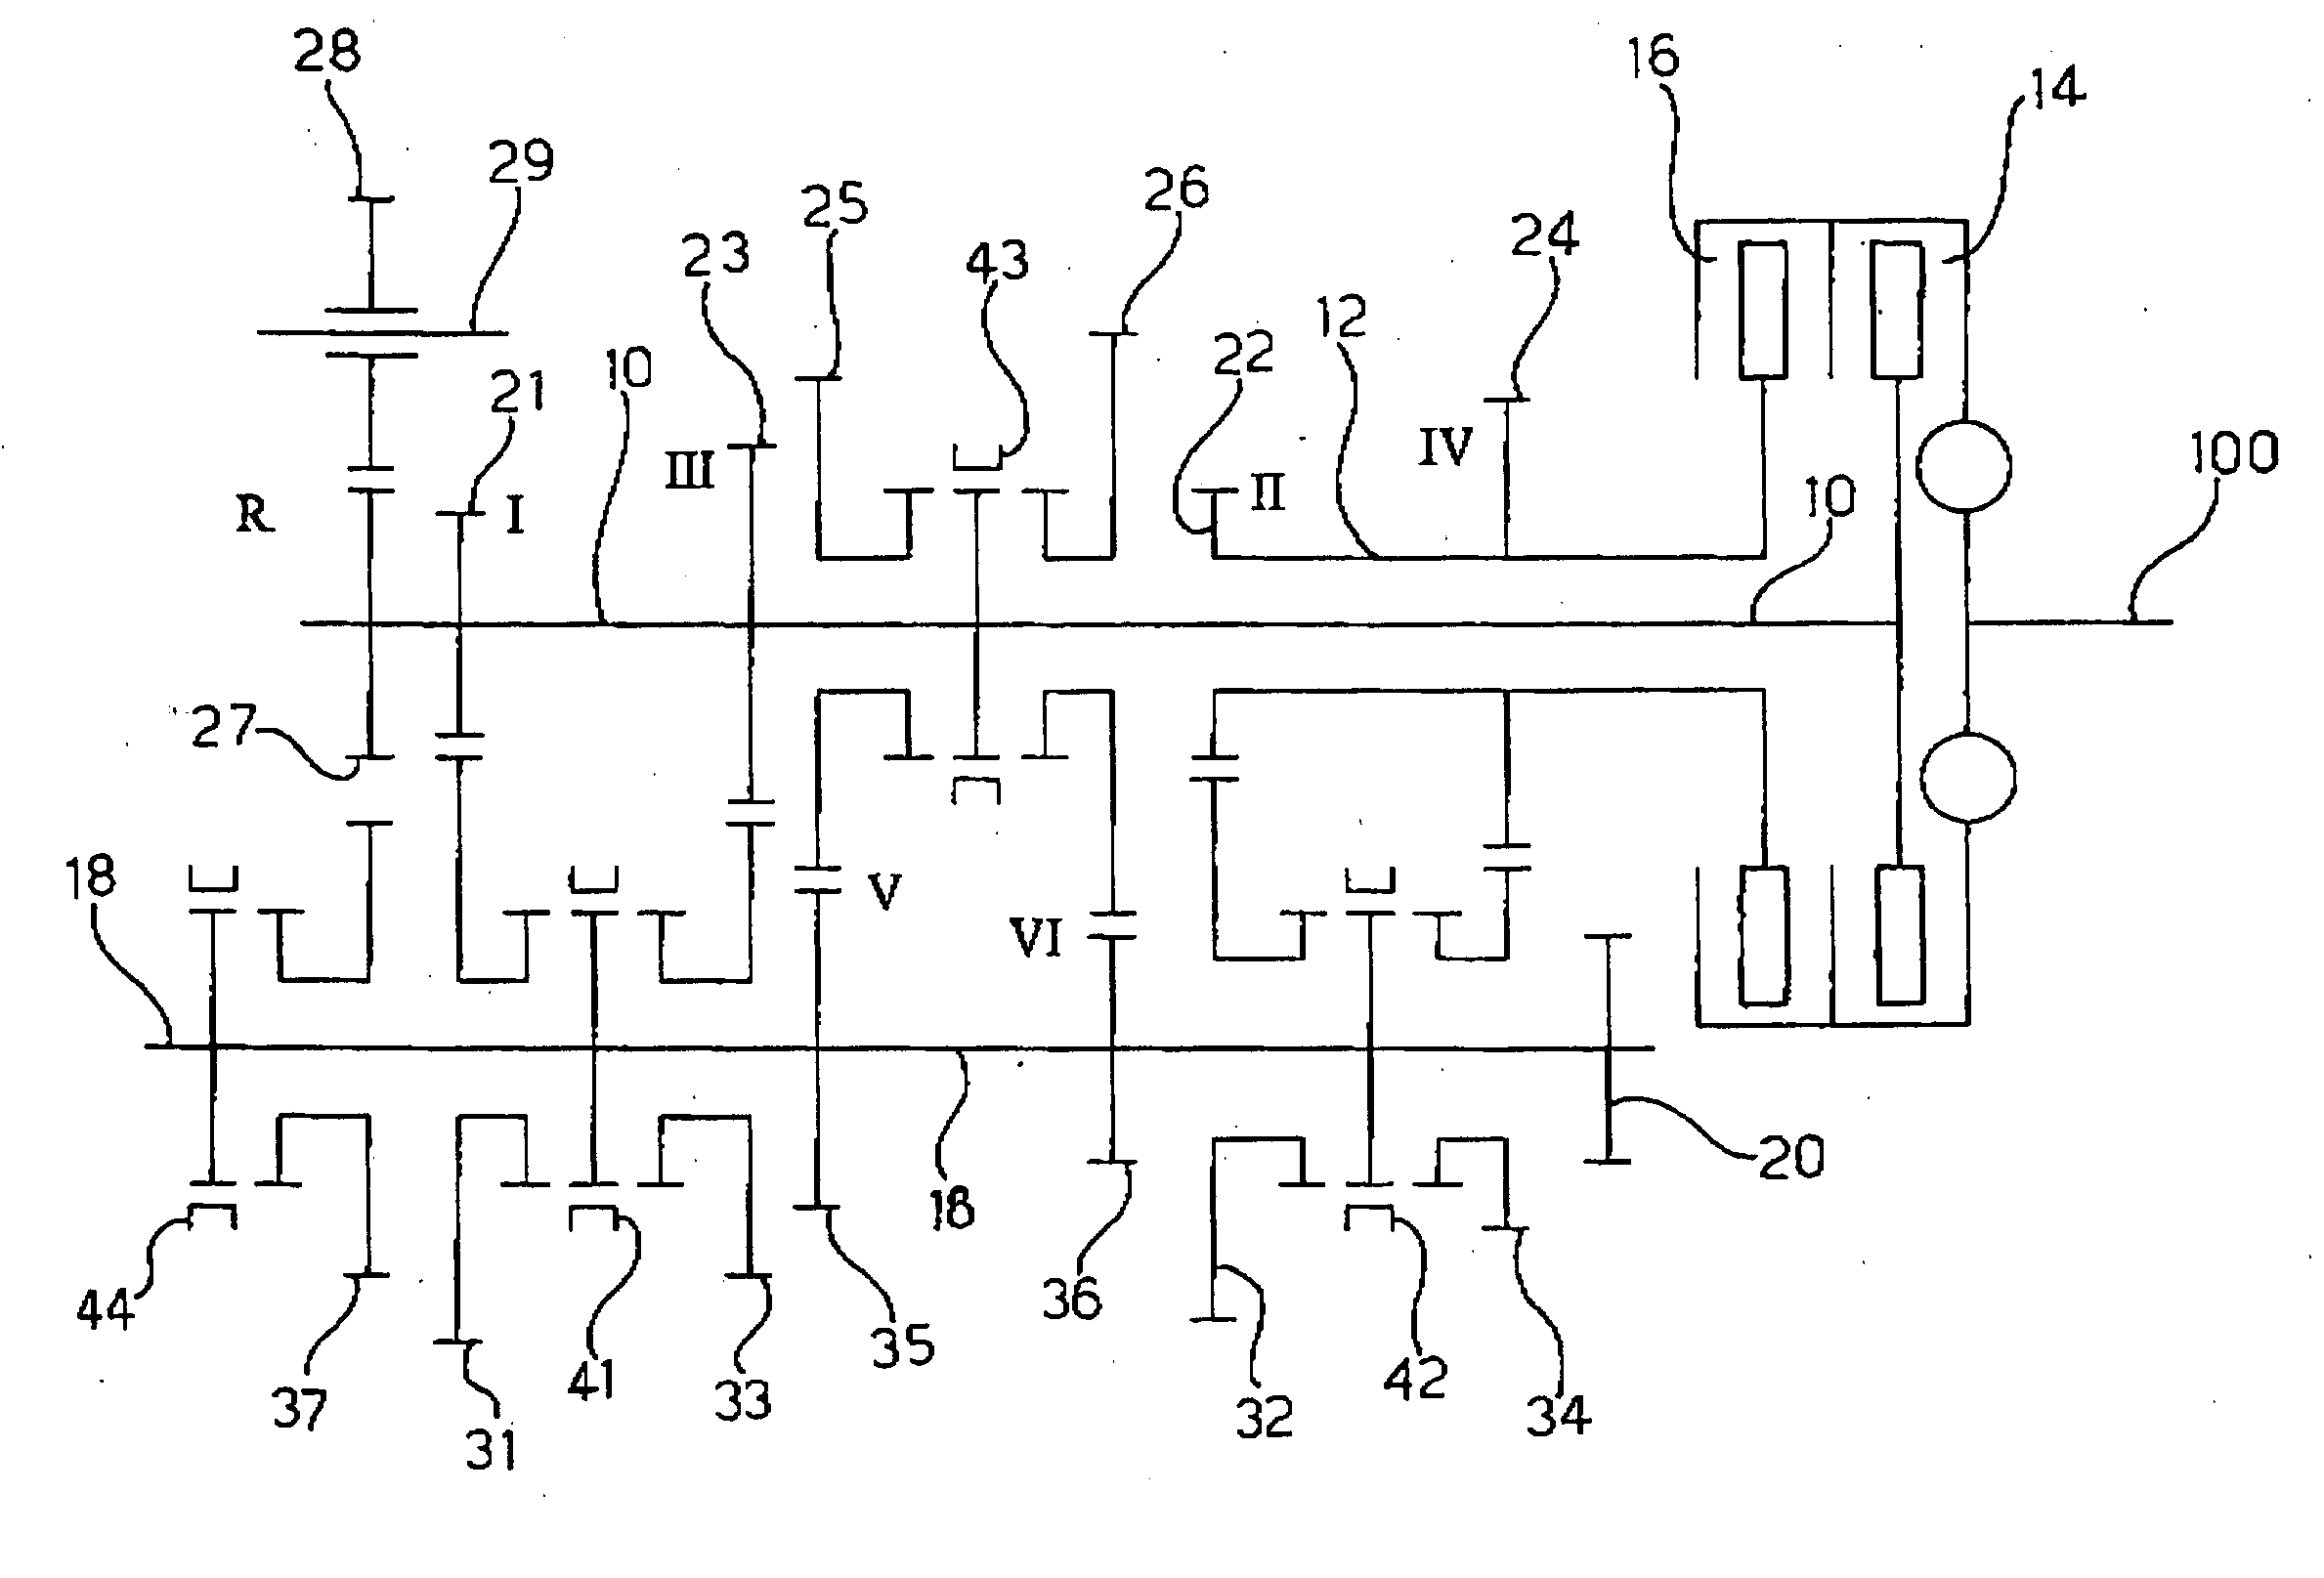 Double-clutch transmission architecture for a motor vehicle